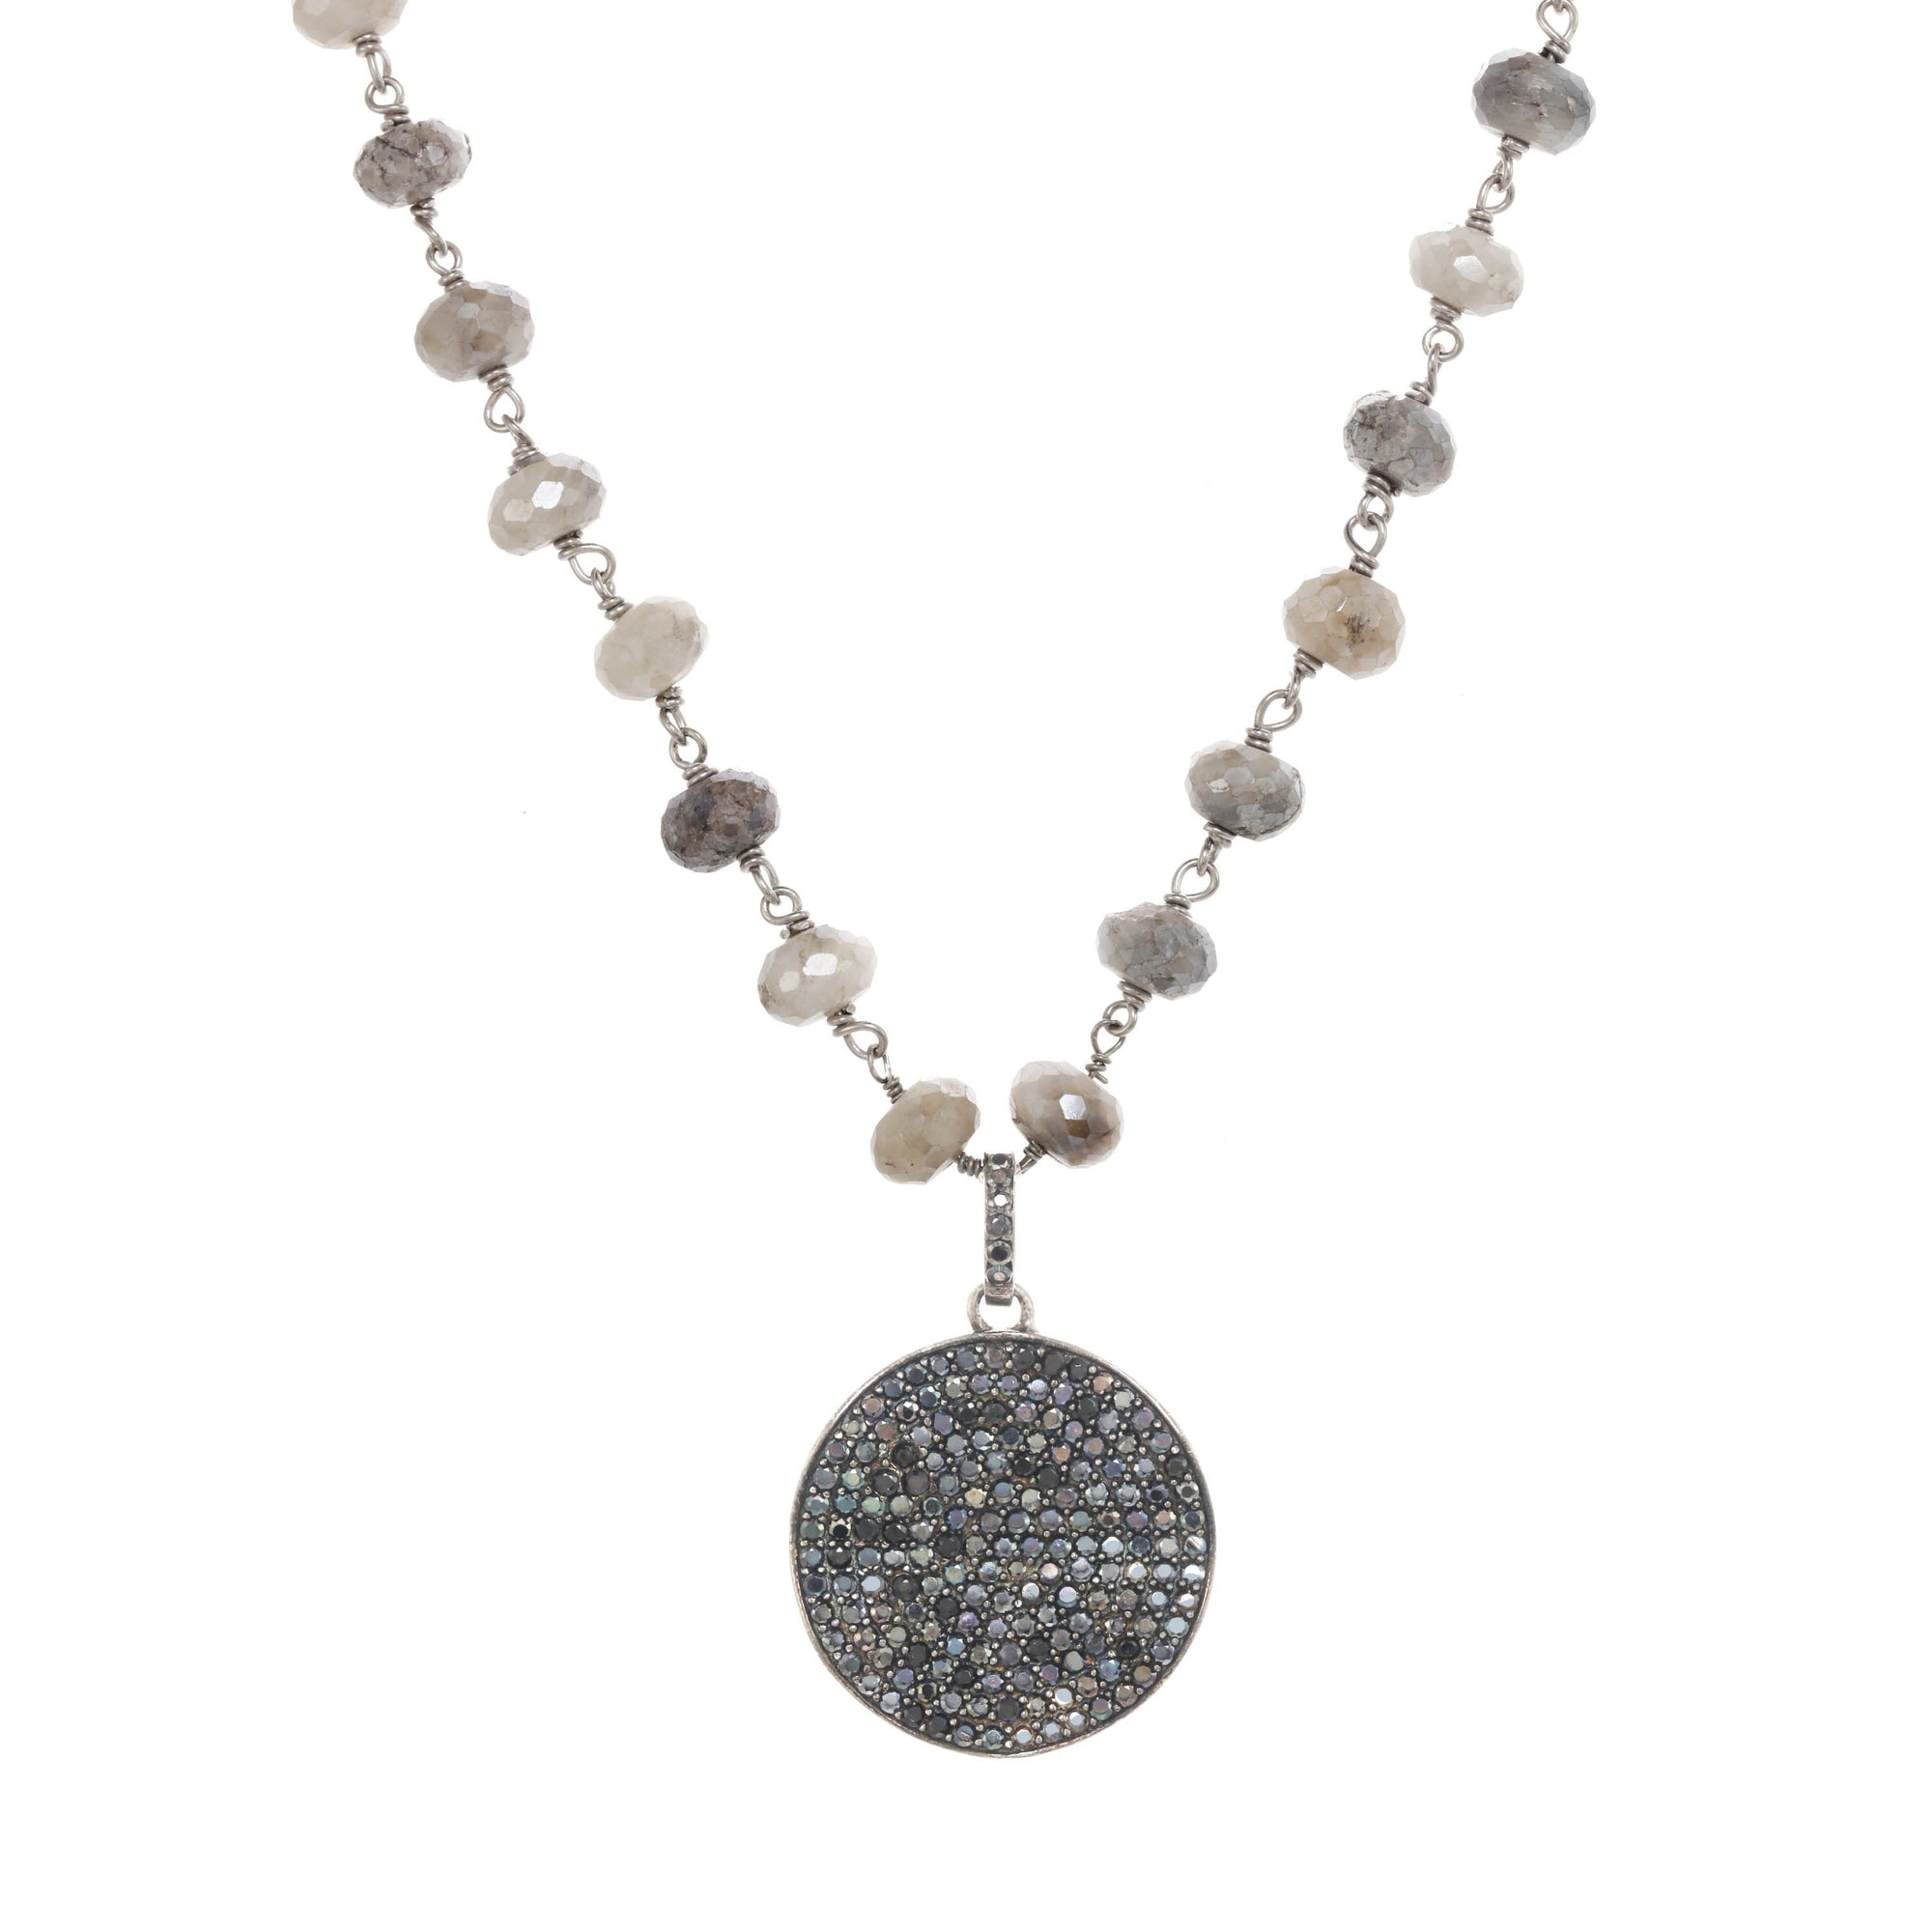 Silverite and Black Spinel Pendant Necklace